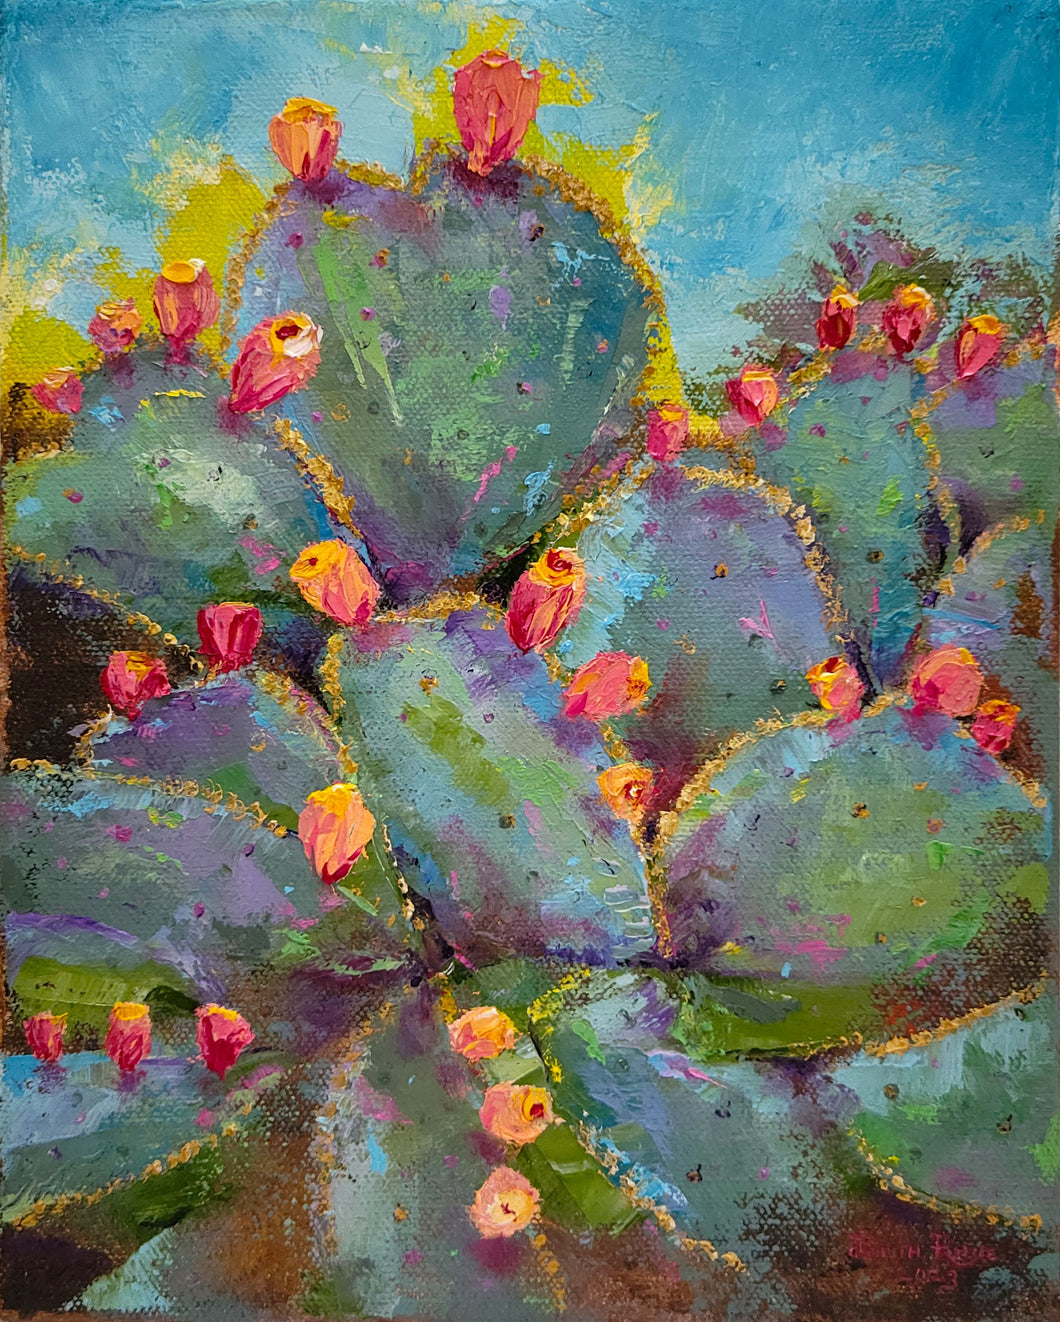 Scottsdale Baubles - original oil painting cactus prickly pear desert landscape plant Arizona colorful cacti one of a kind